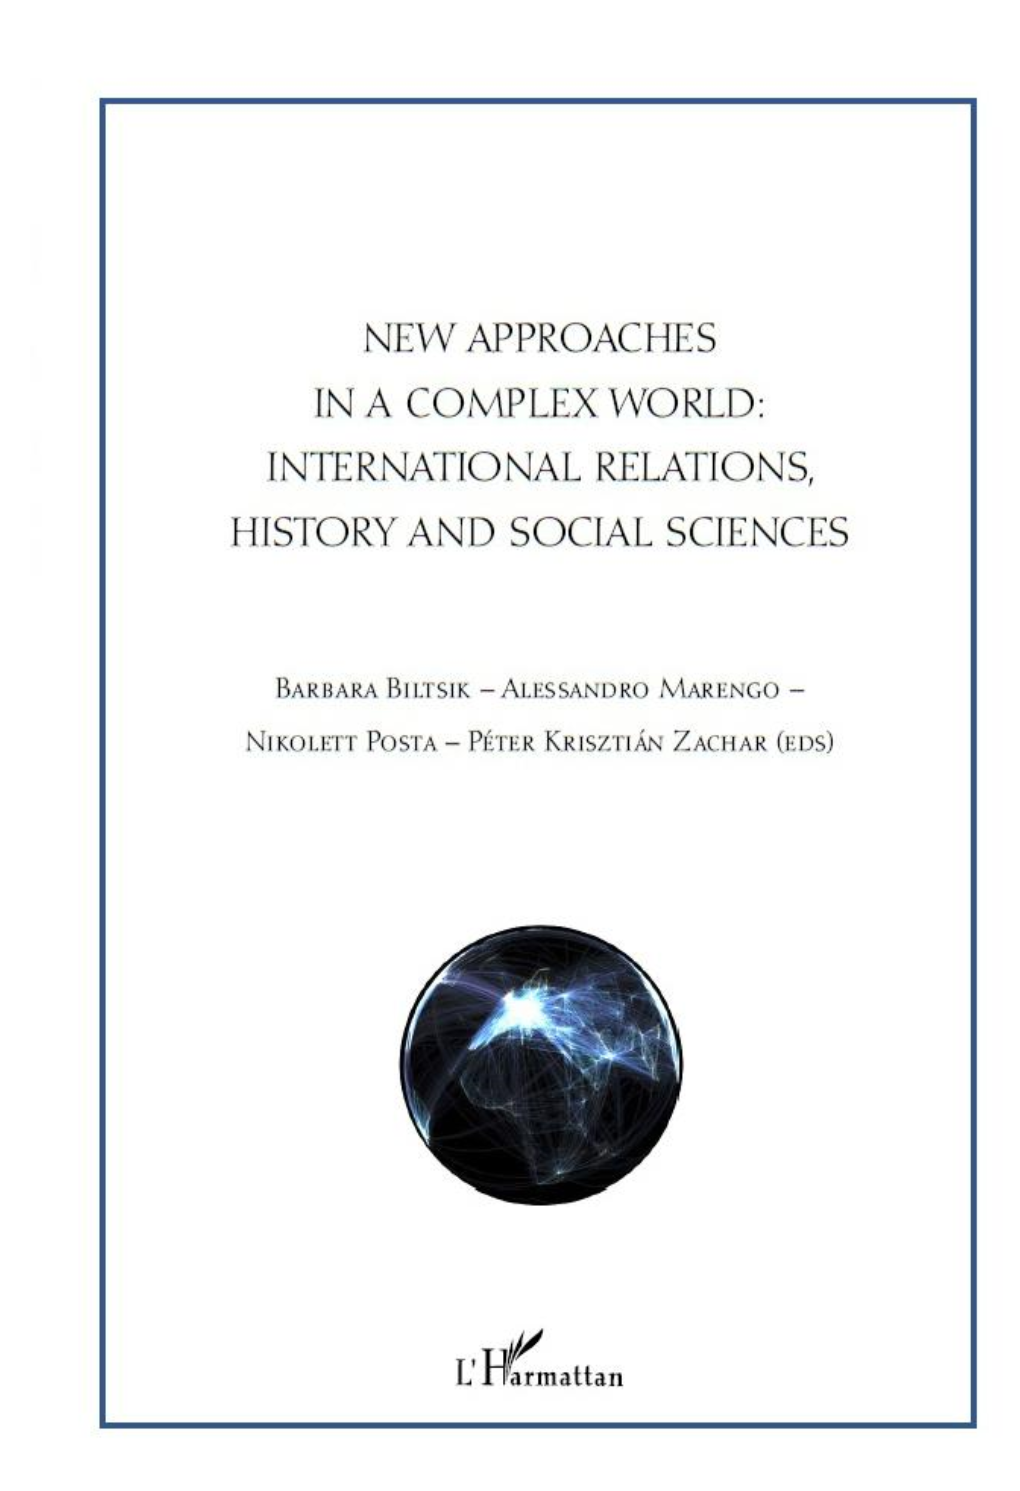 International Relations, History and Social Sciences